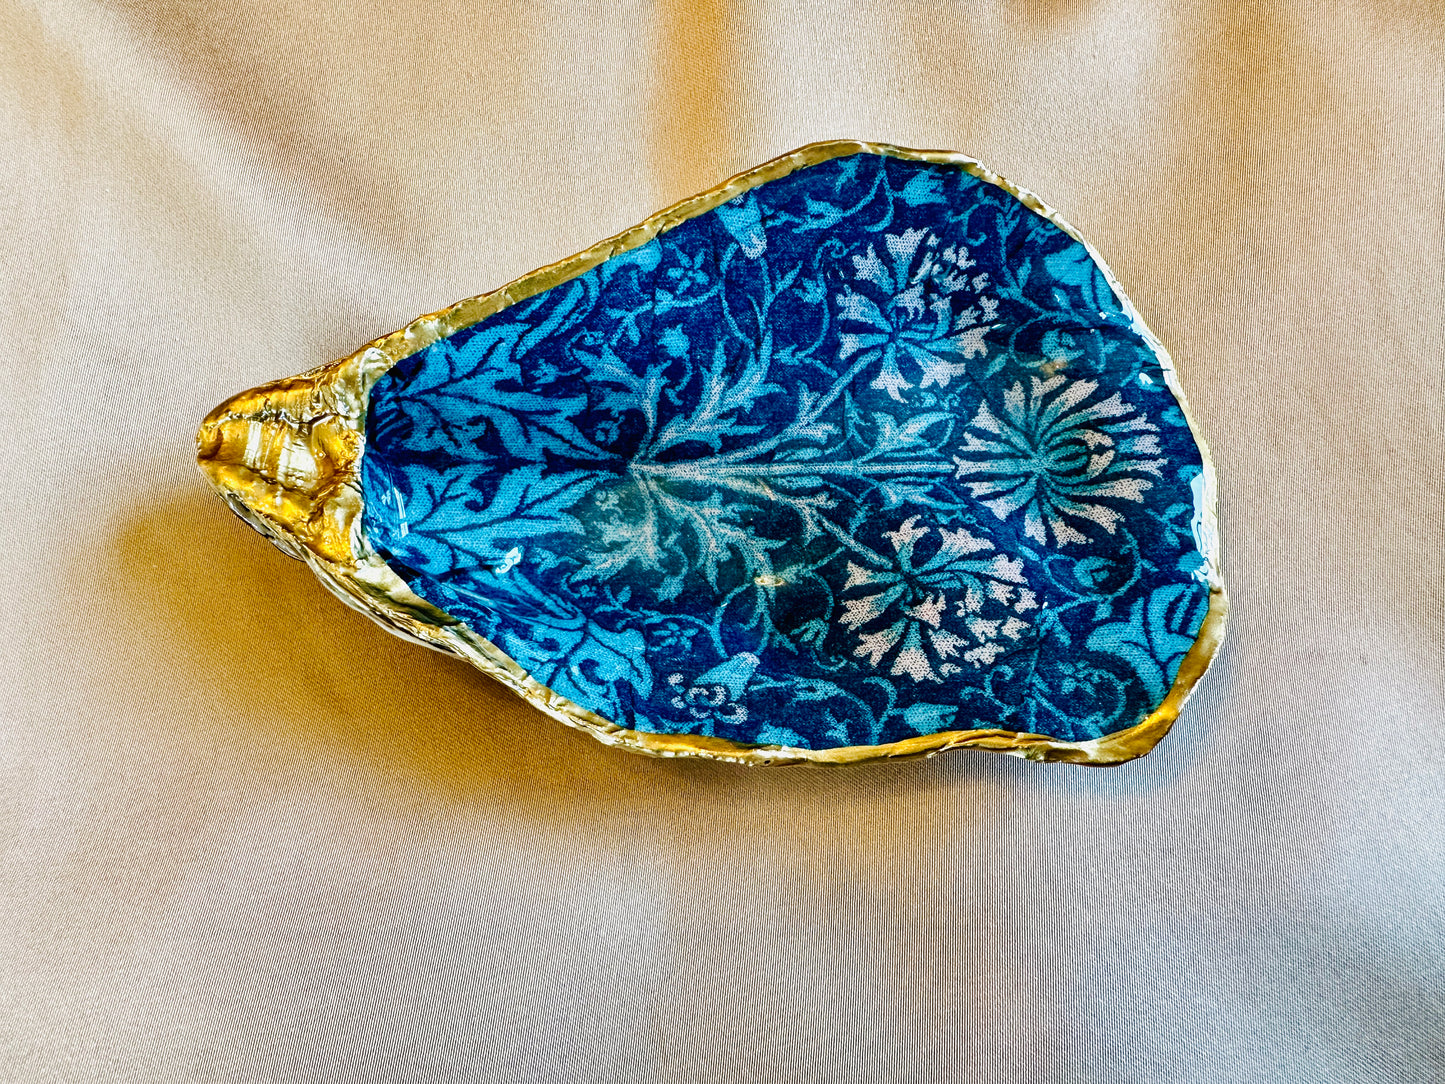 William Morris Tulip in Blue Oyster Shell